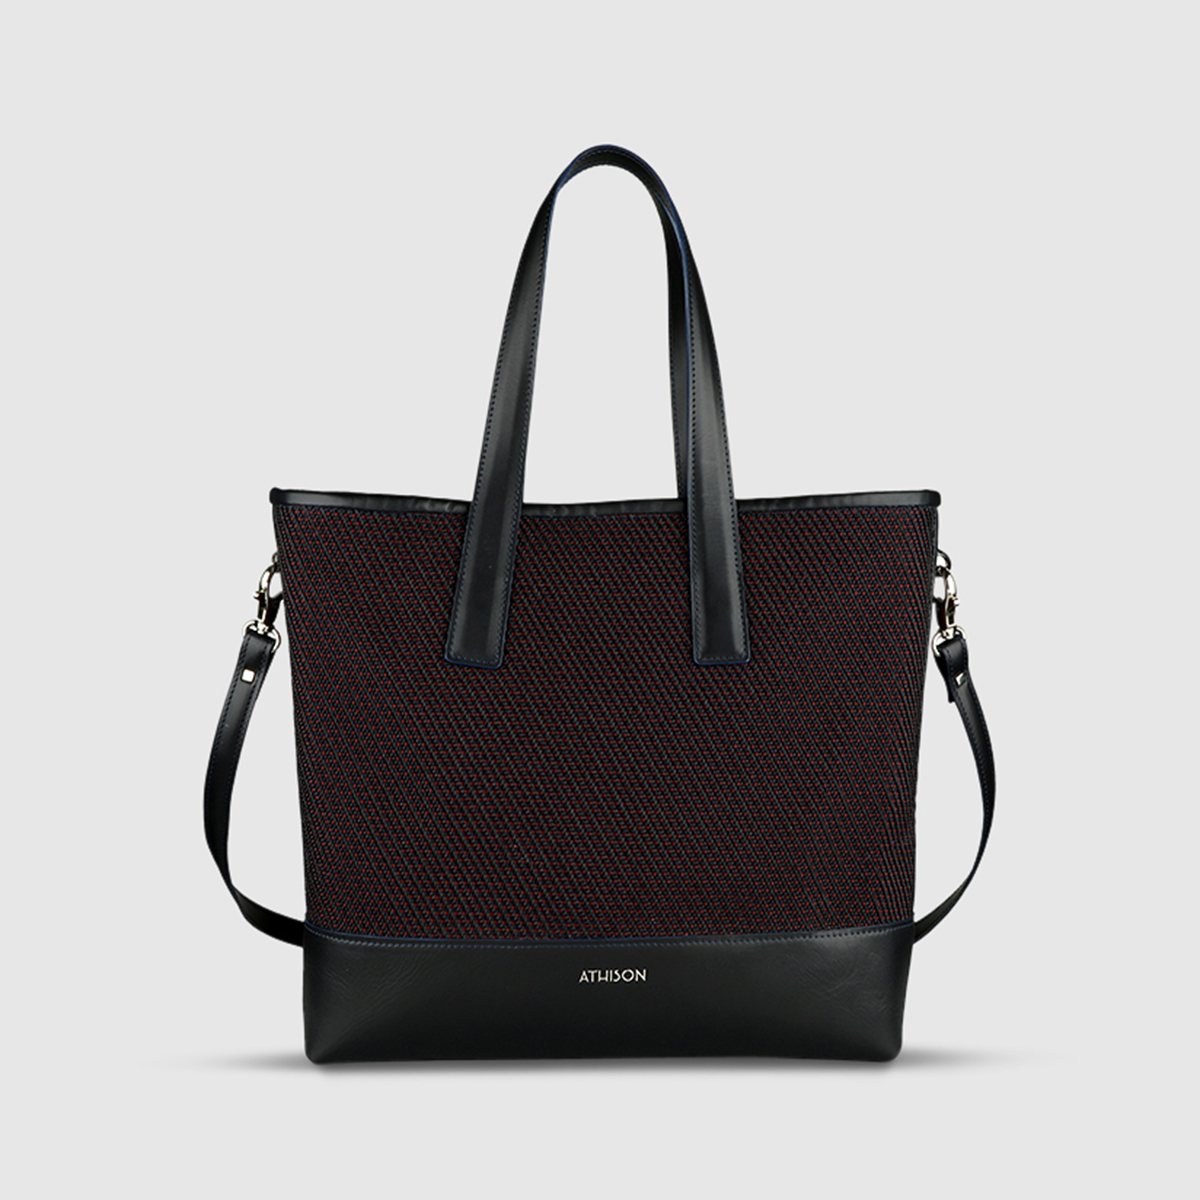 Athison Cotton & Leather Tote Bag